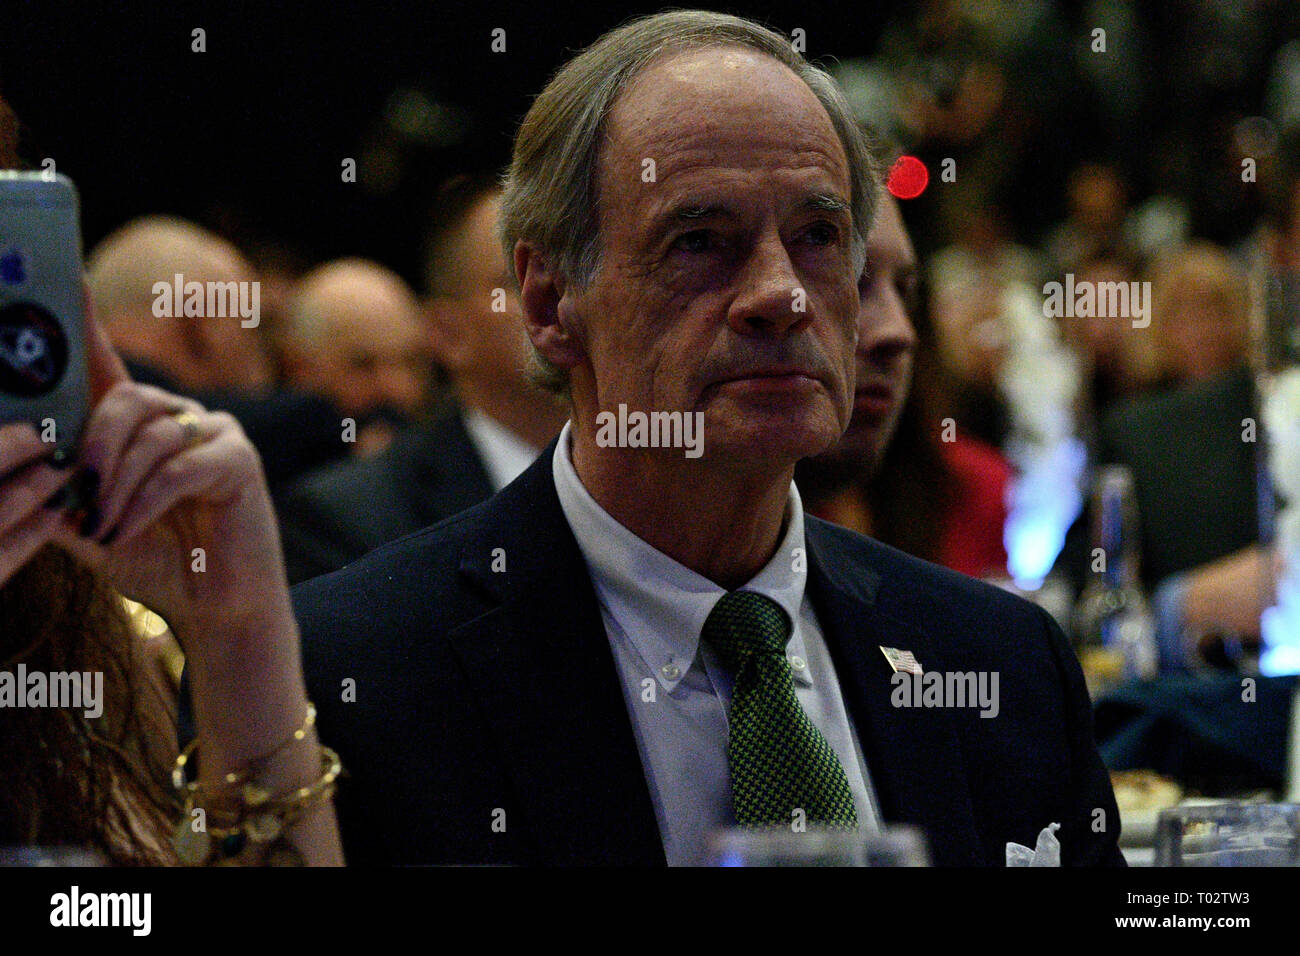 Delaware, USA. 16th March 2019. Sen. Tom Carper listens as Joe Biden delivers the keynote speech at the First State Democratic Dinner at the Rollins Center in Dover, DE on March 16, 2019. The former U.S. Vice President refrained from announcing his candidacy, even-though early polls conducted in March indicate former Vice President Biden as the favorite of a large Democratic field of candidates. Credit: OOgImages/Alamy Live News Stock Photo